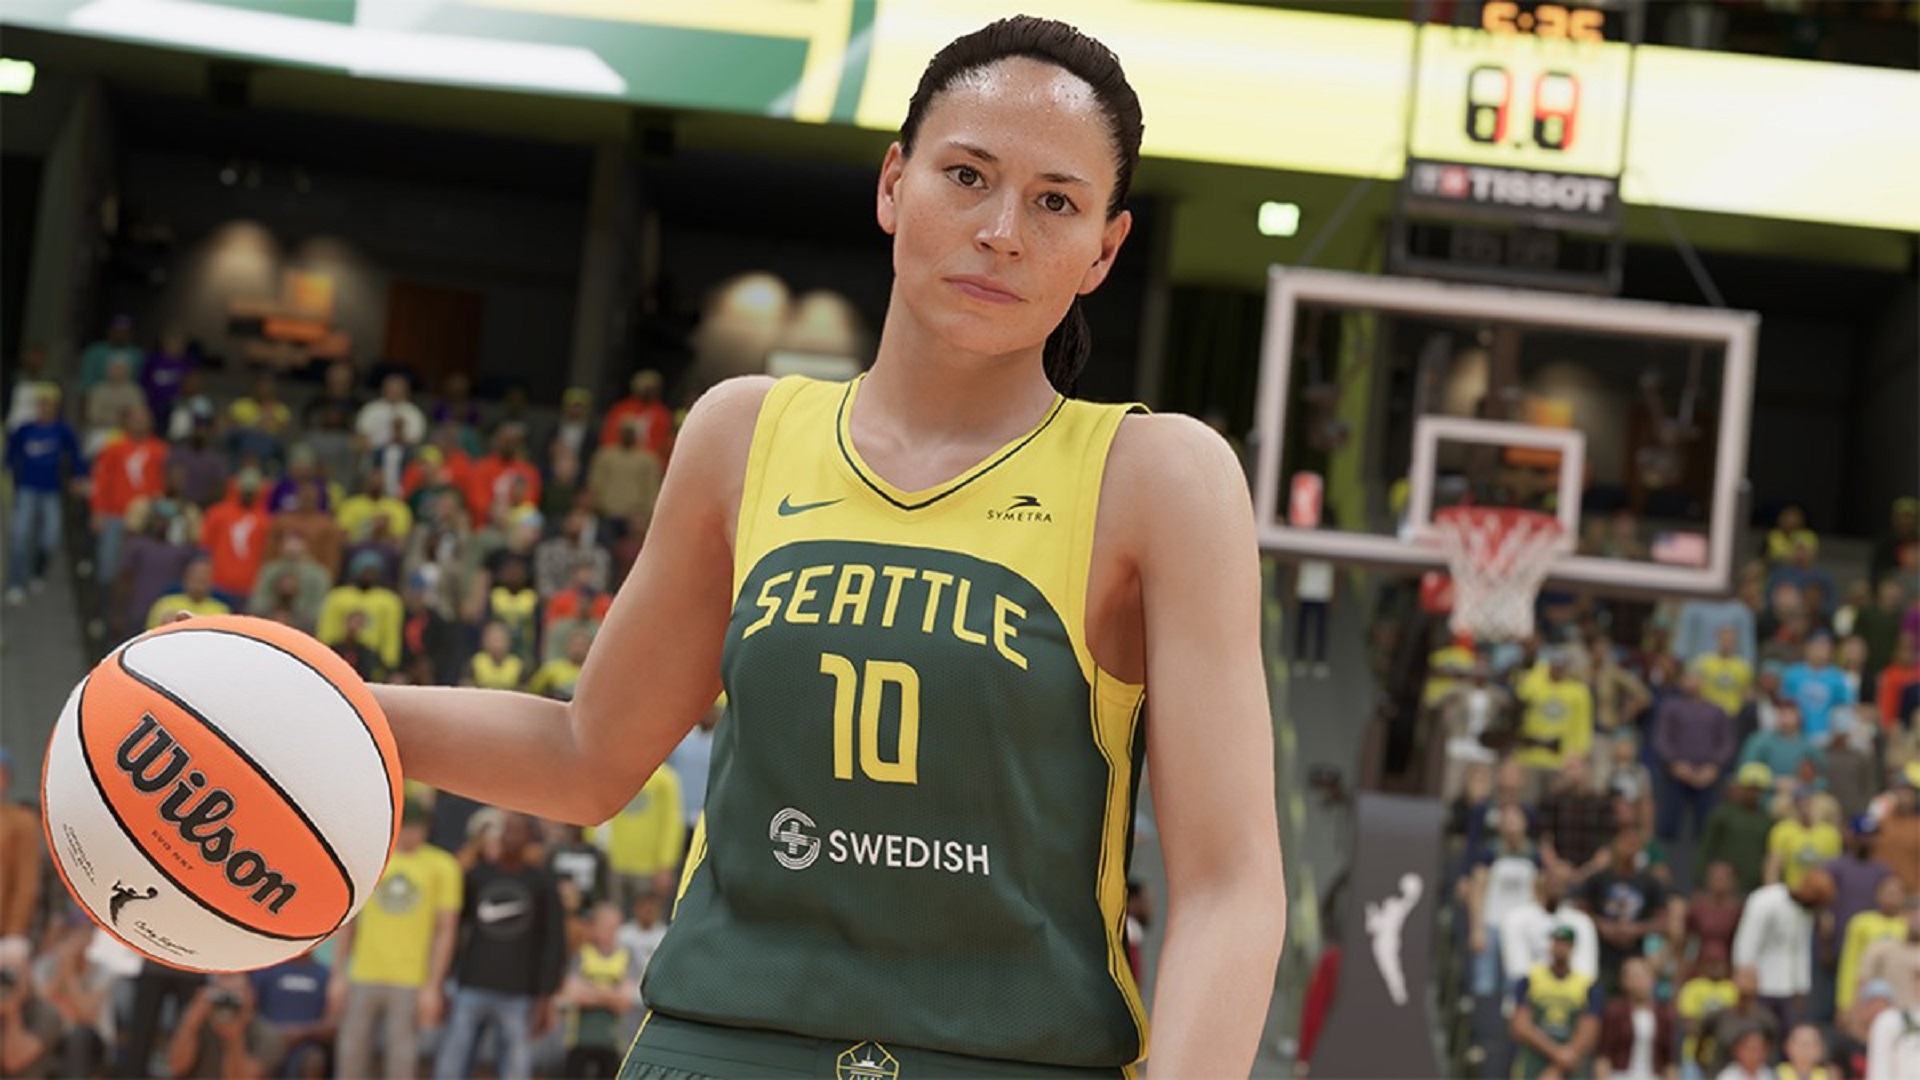 NBA 2K23 MyTeam Removes Contracts, Brings Back Seasons